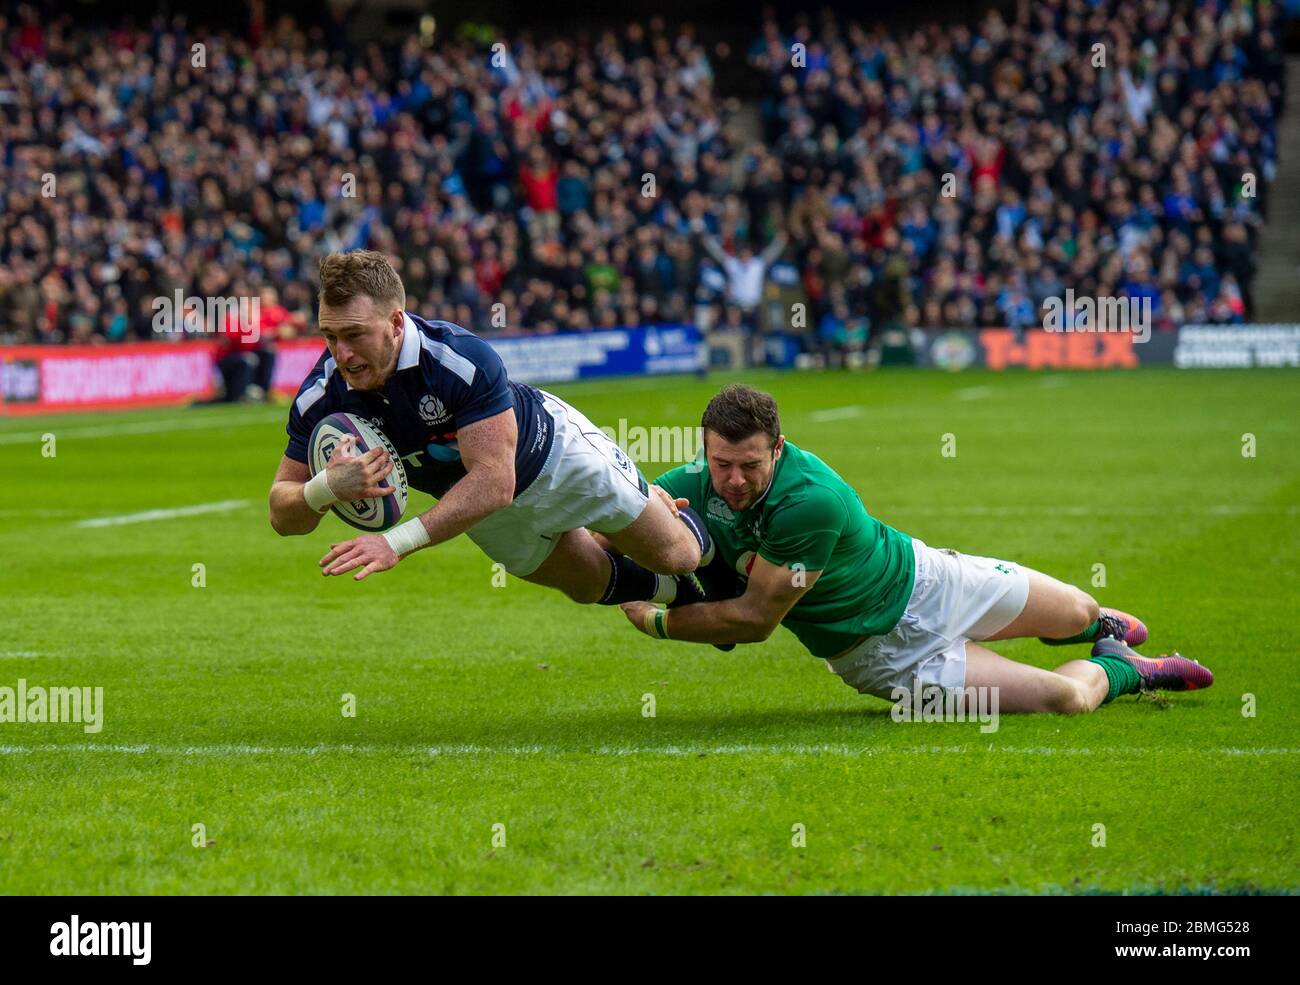 Stuart Hogg of Scotland scores a try with Robbie Henshaw of Ireland failing to tackle him during the RBS Six Nations International, Scotland v Ireland. Stock Photo